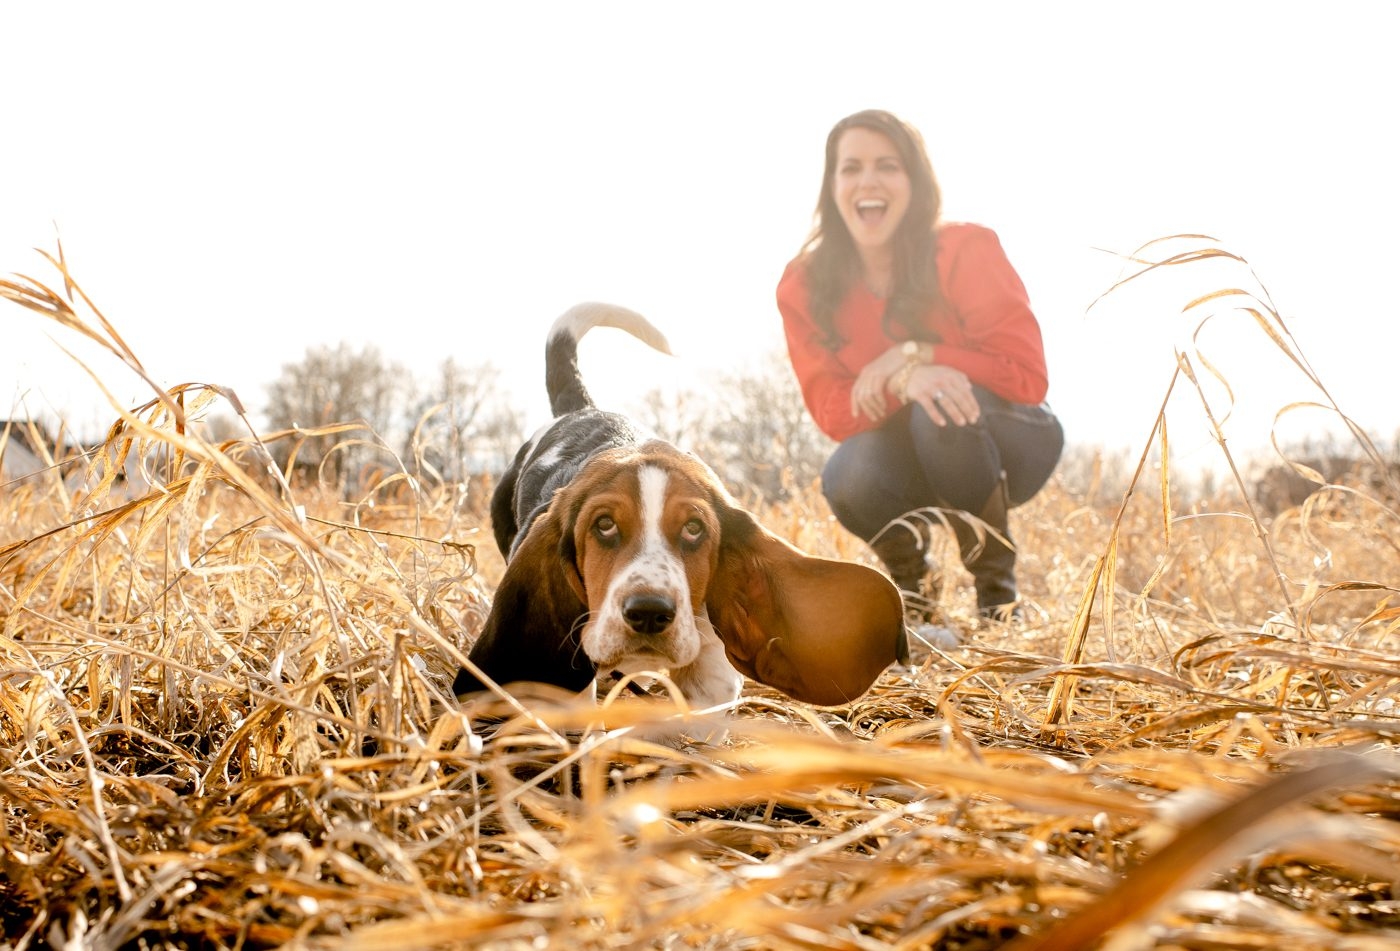 basset-hound-puppy-running-with-laughing-woman